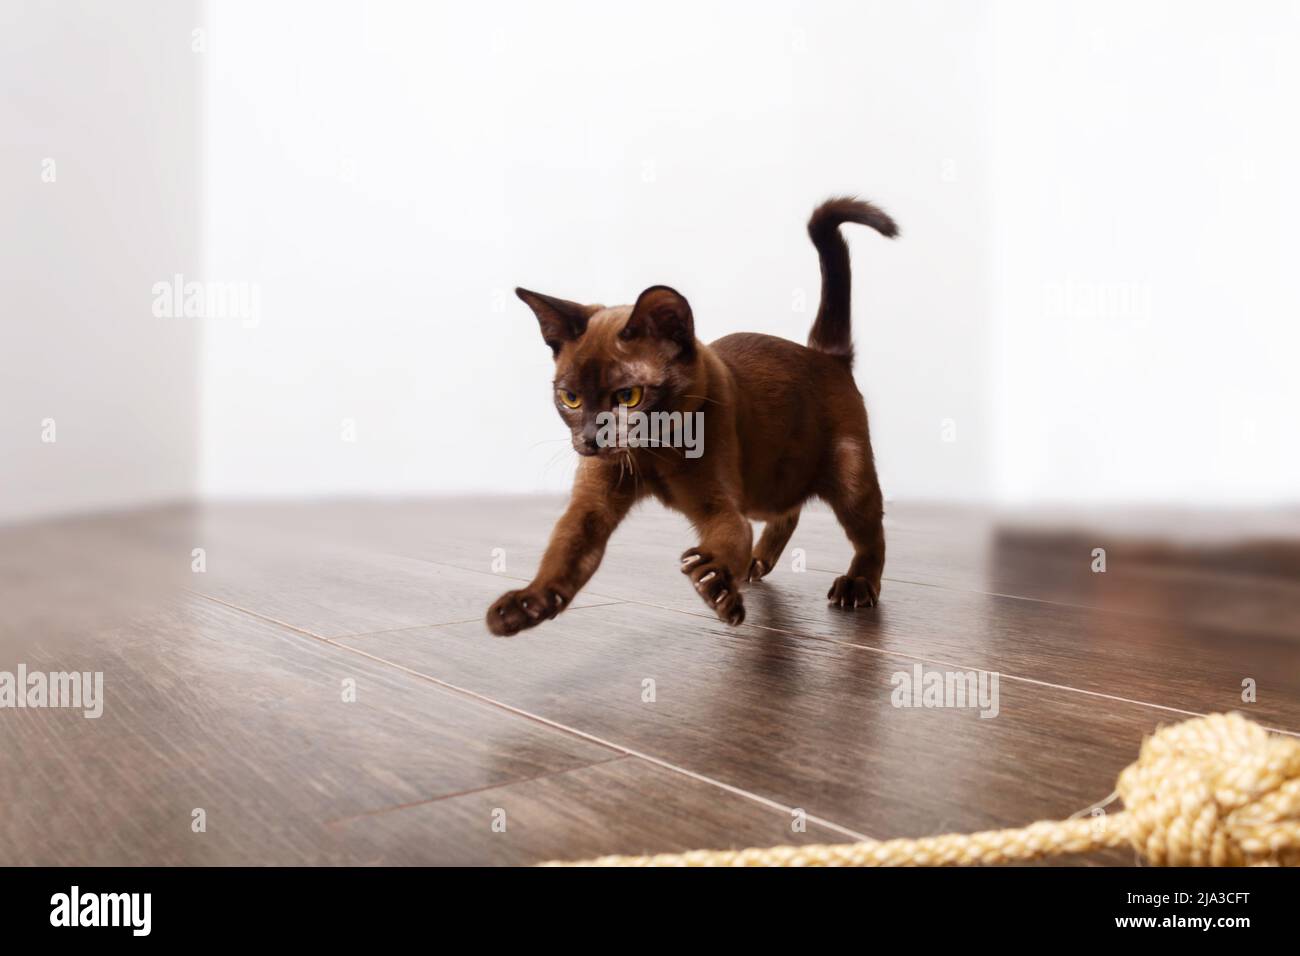 Playful adorable burmese kitten playing with rope.  Stock Photo